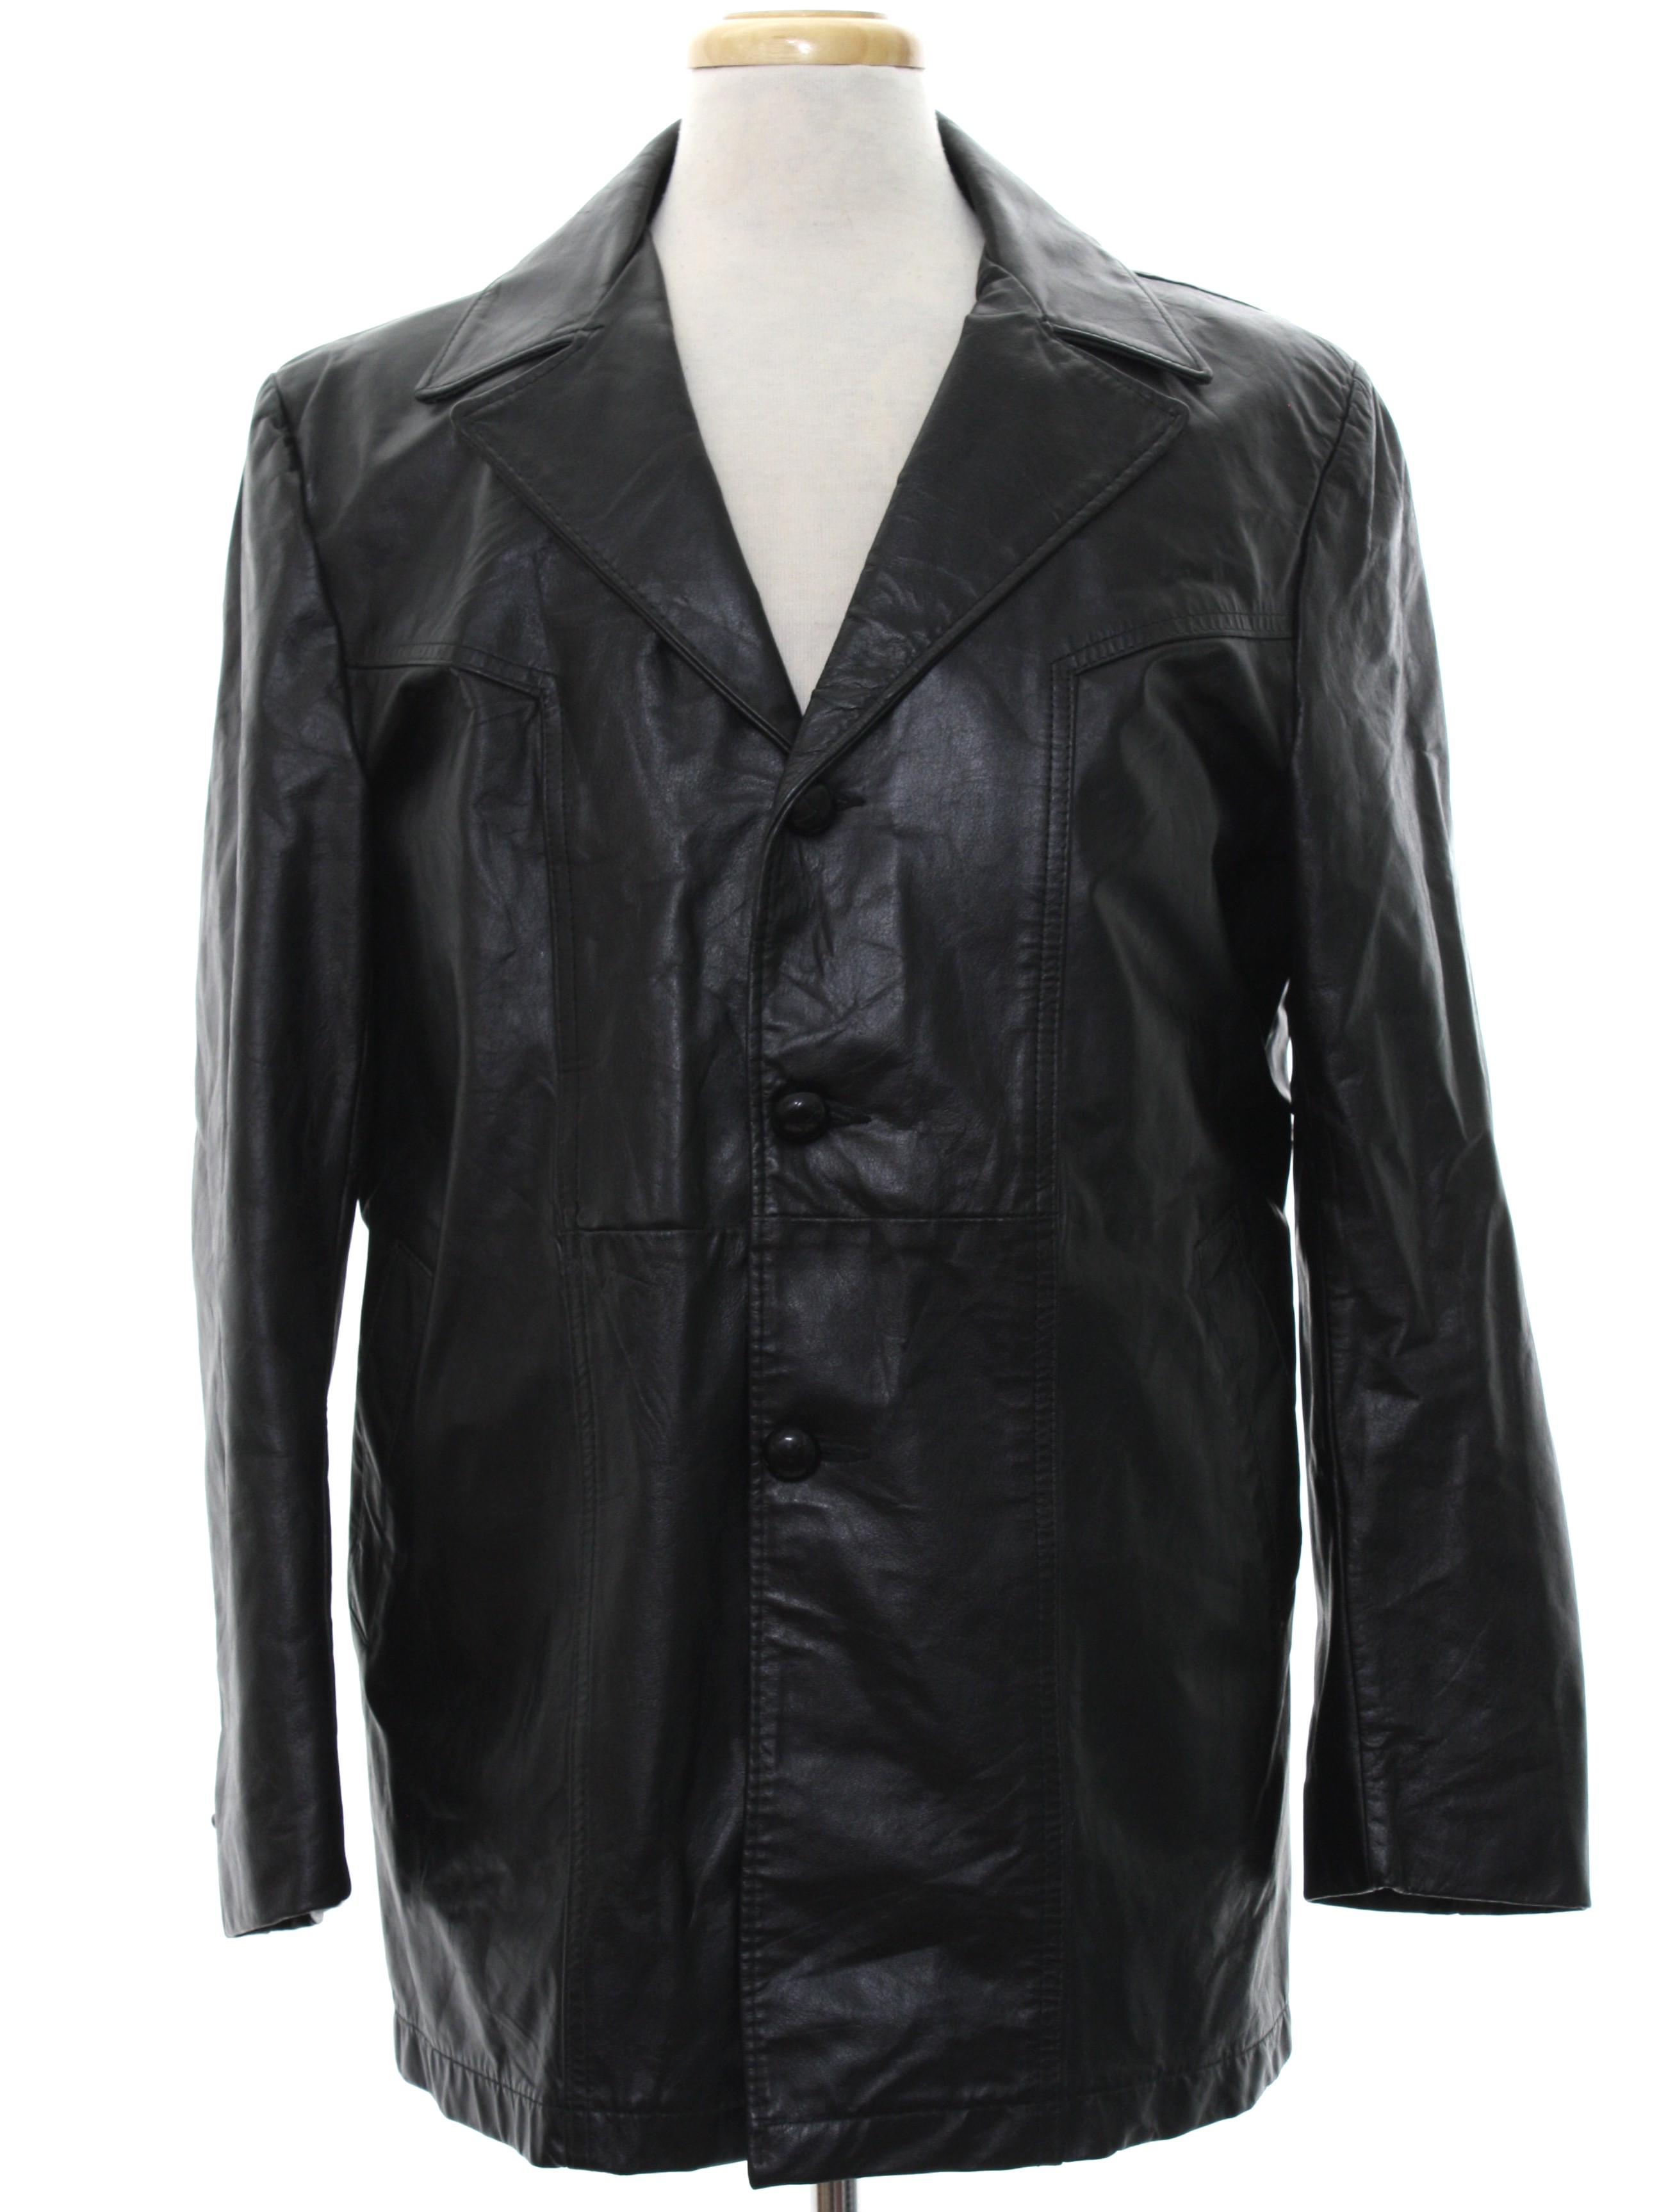 Eighties Leather Jacket: 80s -Sears Mens Store Leather Shop- Mens black ...